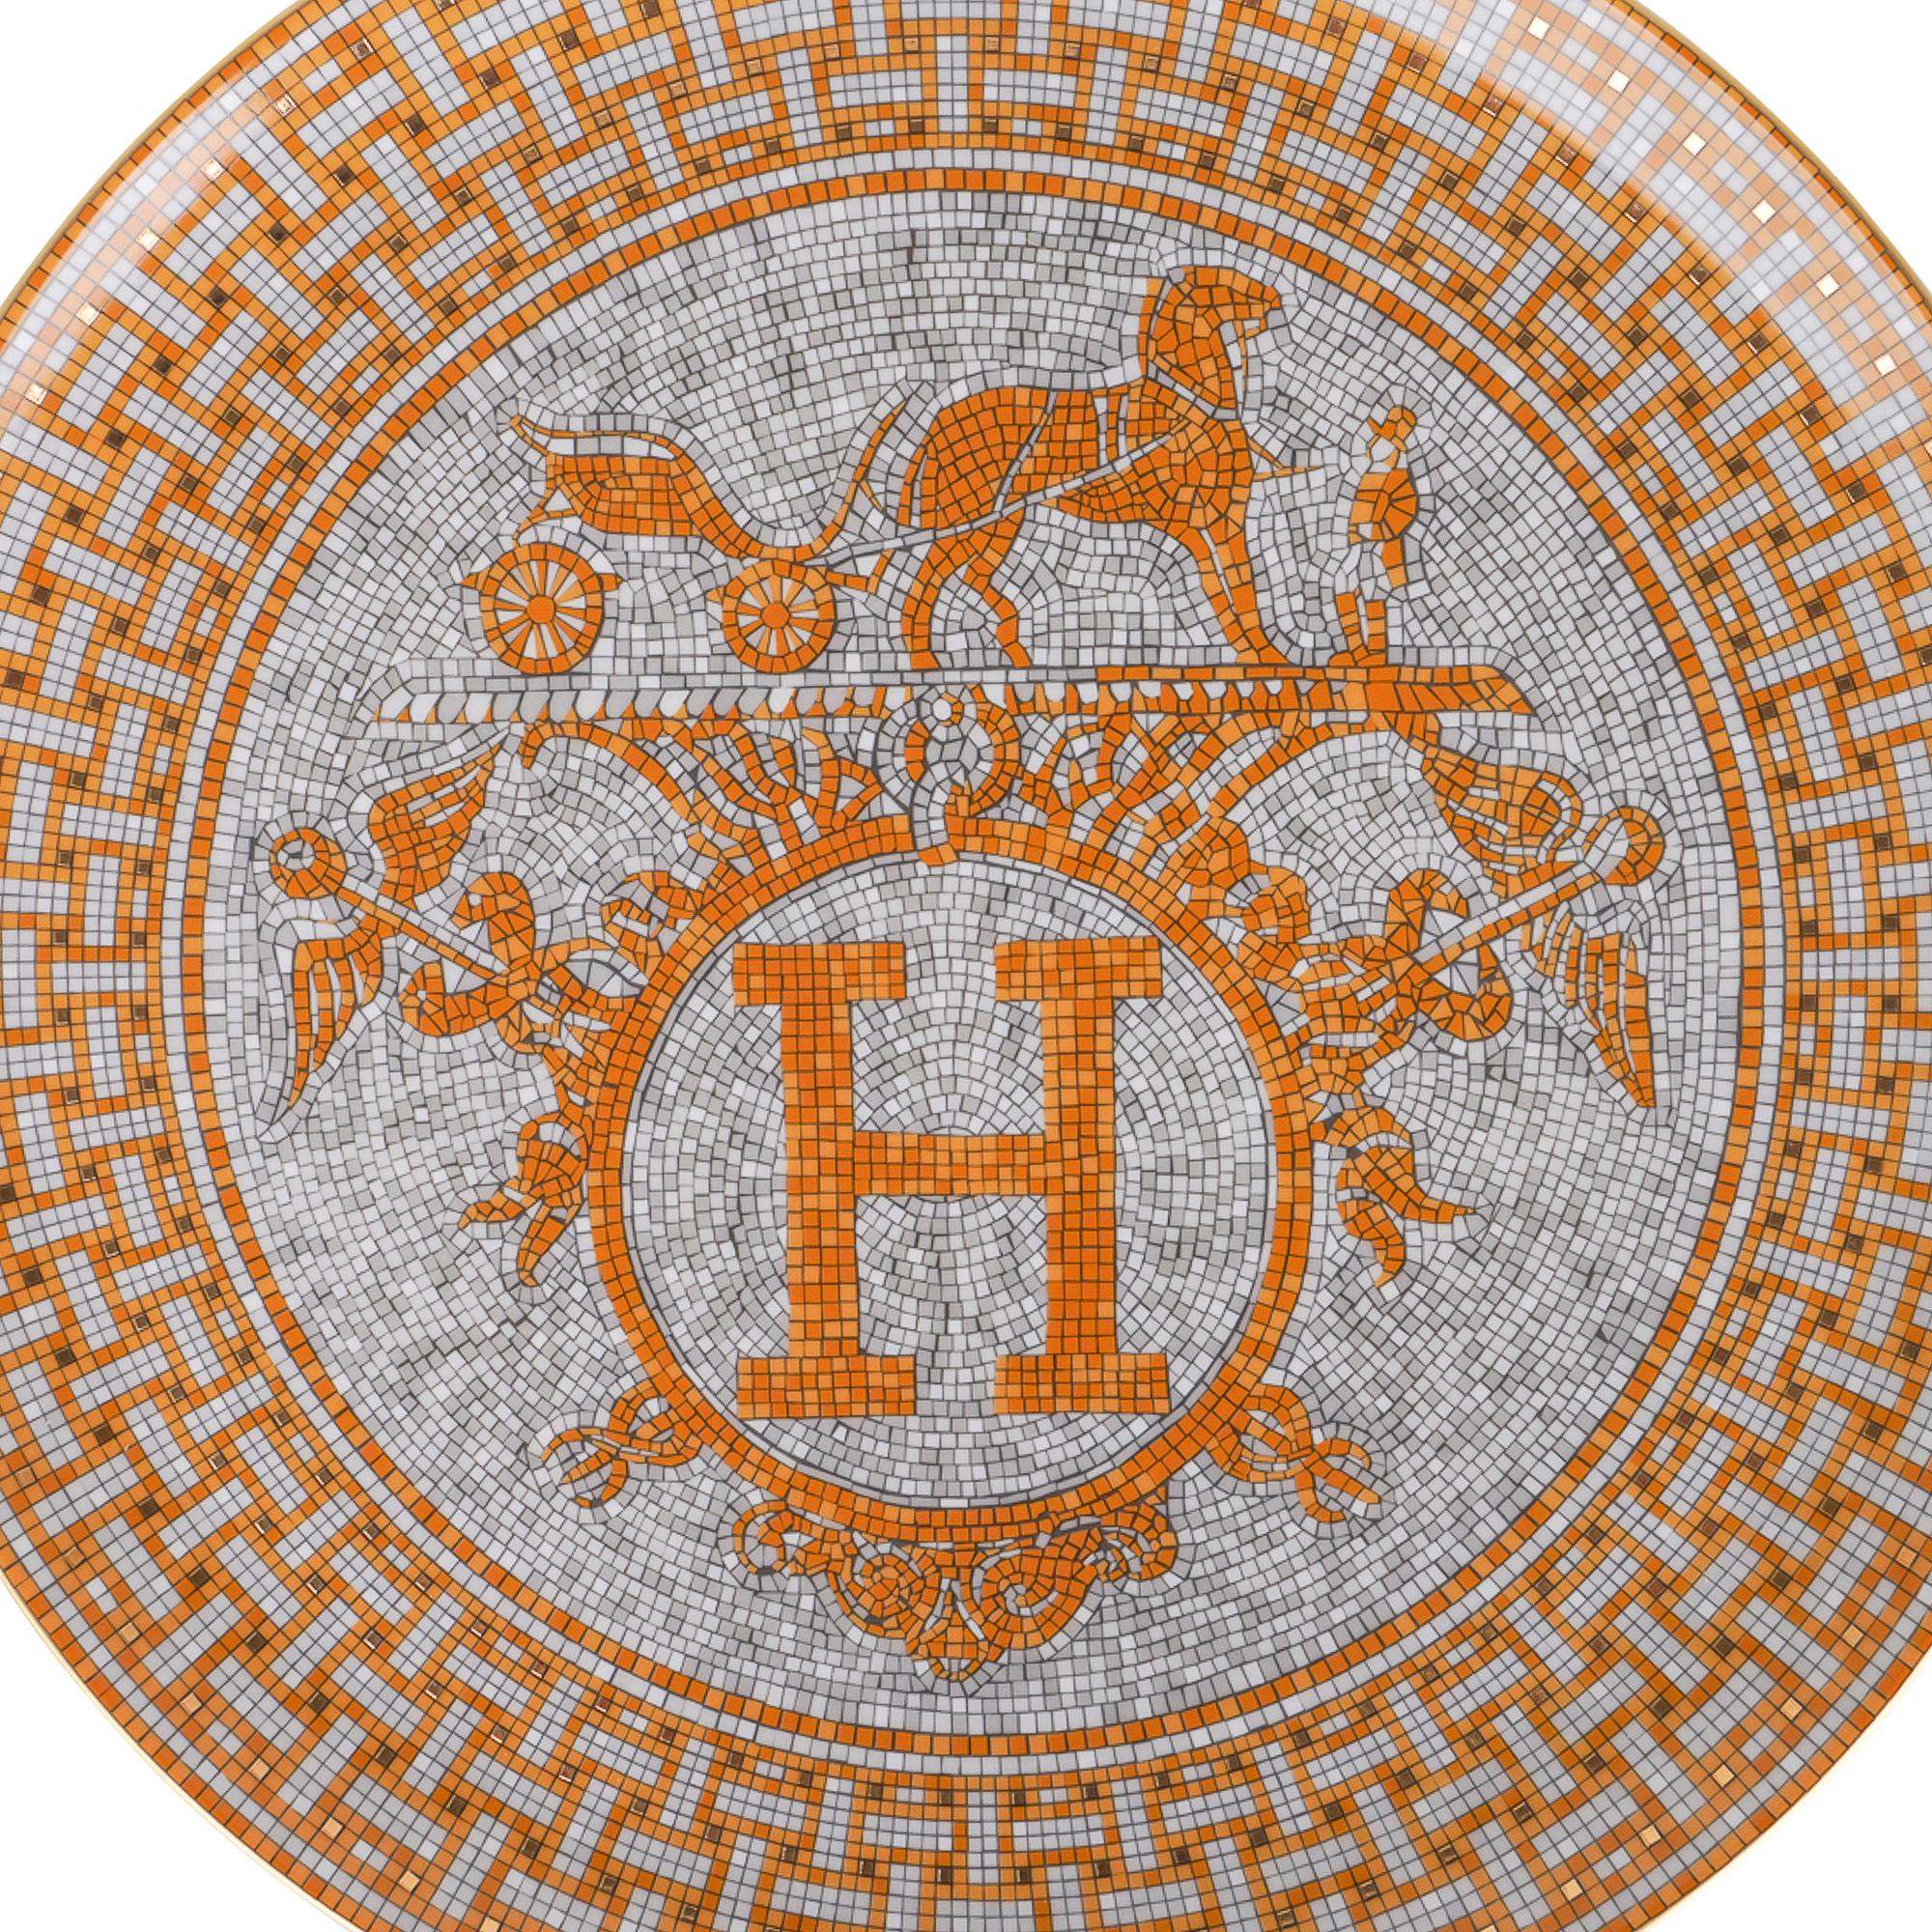 Mightychic offers an Hermes Mosaique Au 24 Gold Tart Platter in porcelain.
The mosaic motif reflects the mosaic floor at the entrance of the 24 Faubourg St. Honore flagship store in Paris.
A perfect accent piece for any room.
Wonderful for home or